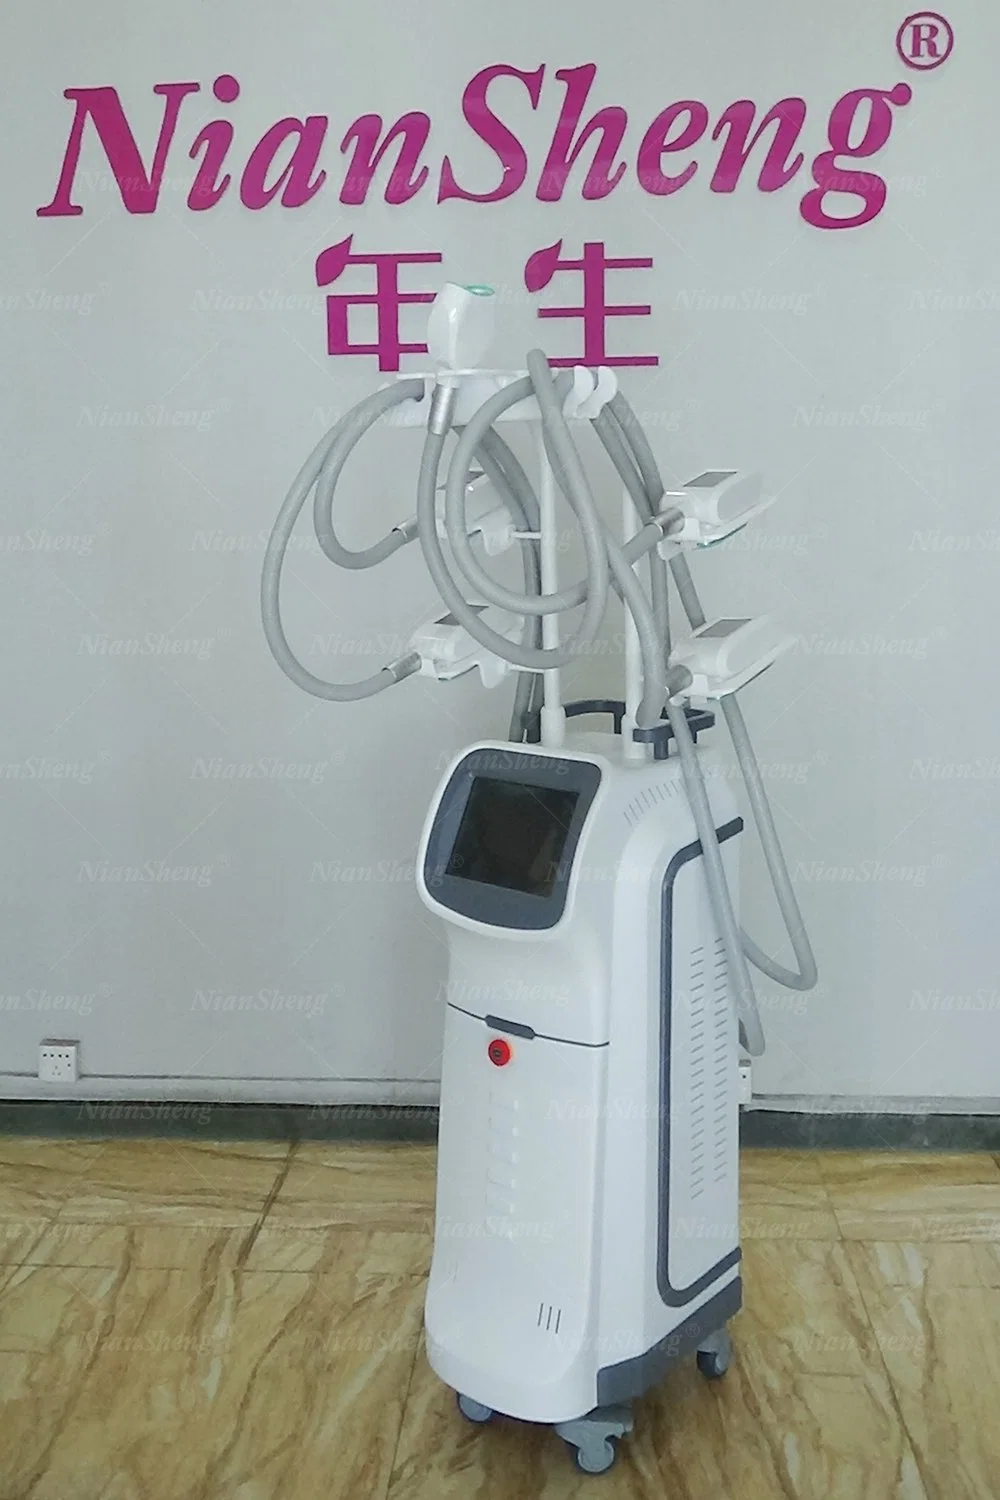 Multipe 5 Head Auto Cryolipolysis Vacuum 360 Degree Fat Freezing Weight Loss Shockwave Physical Therapy Cryolipolysis Machine